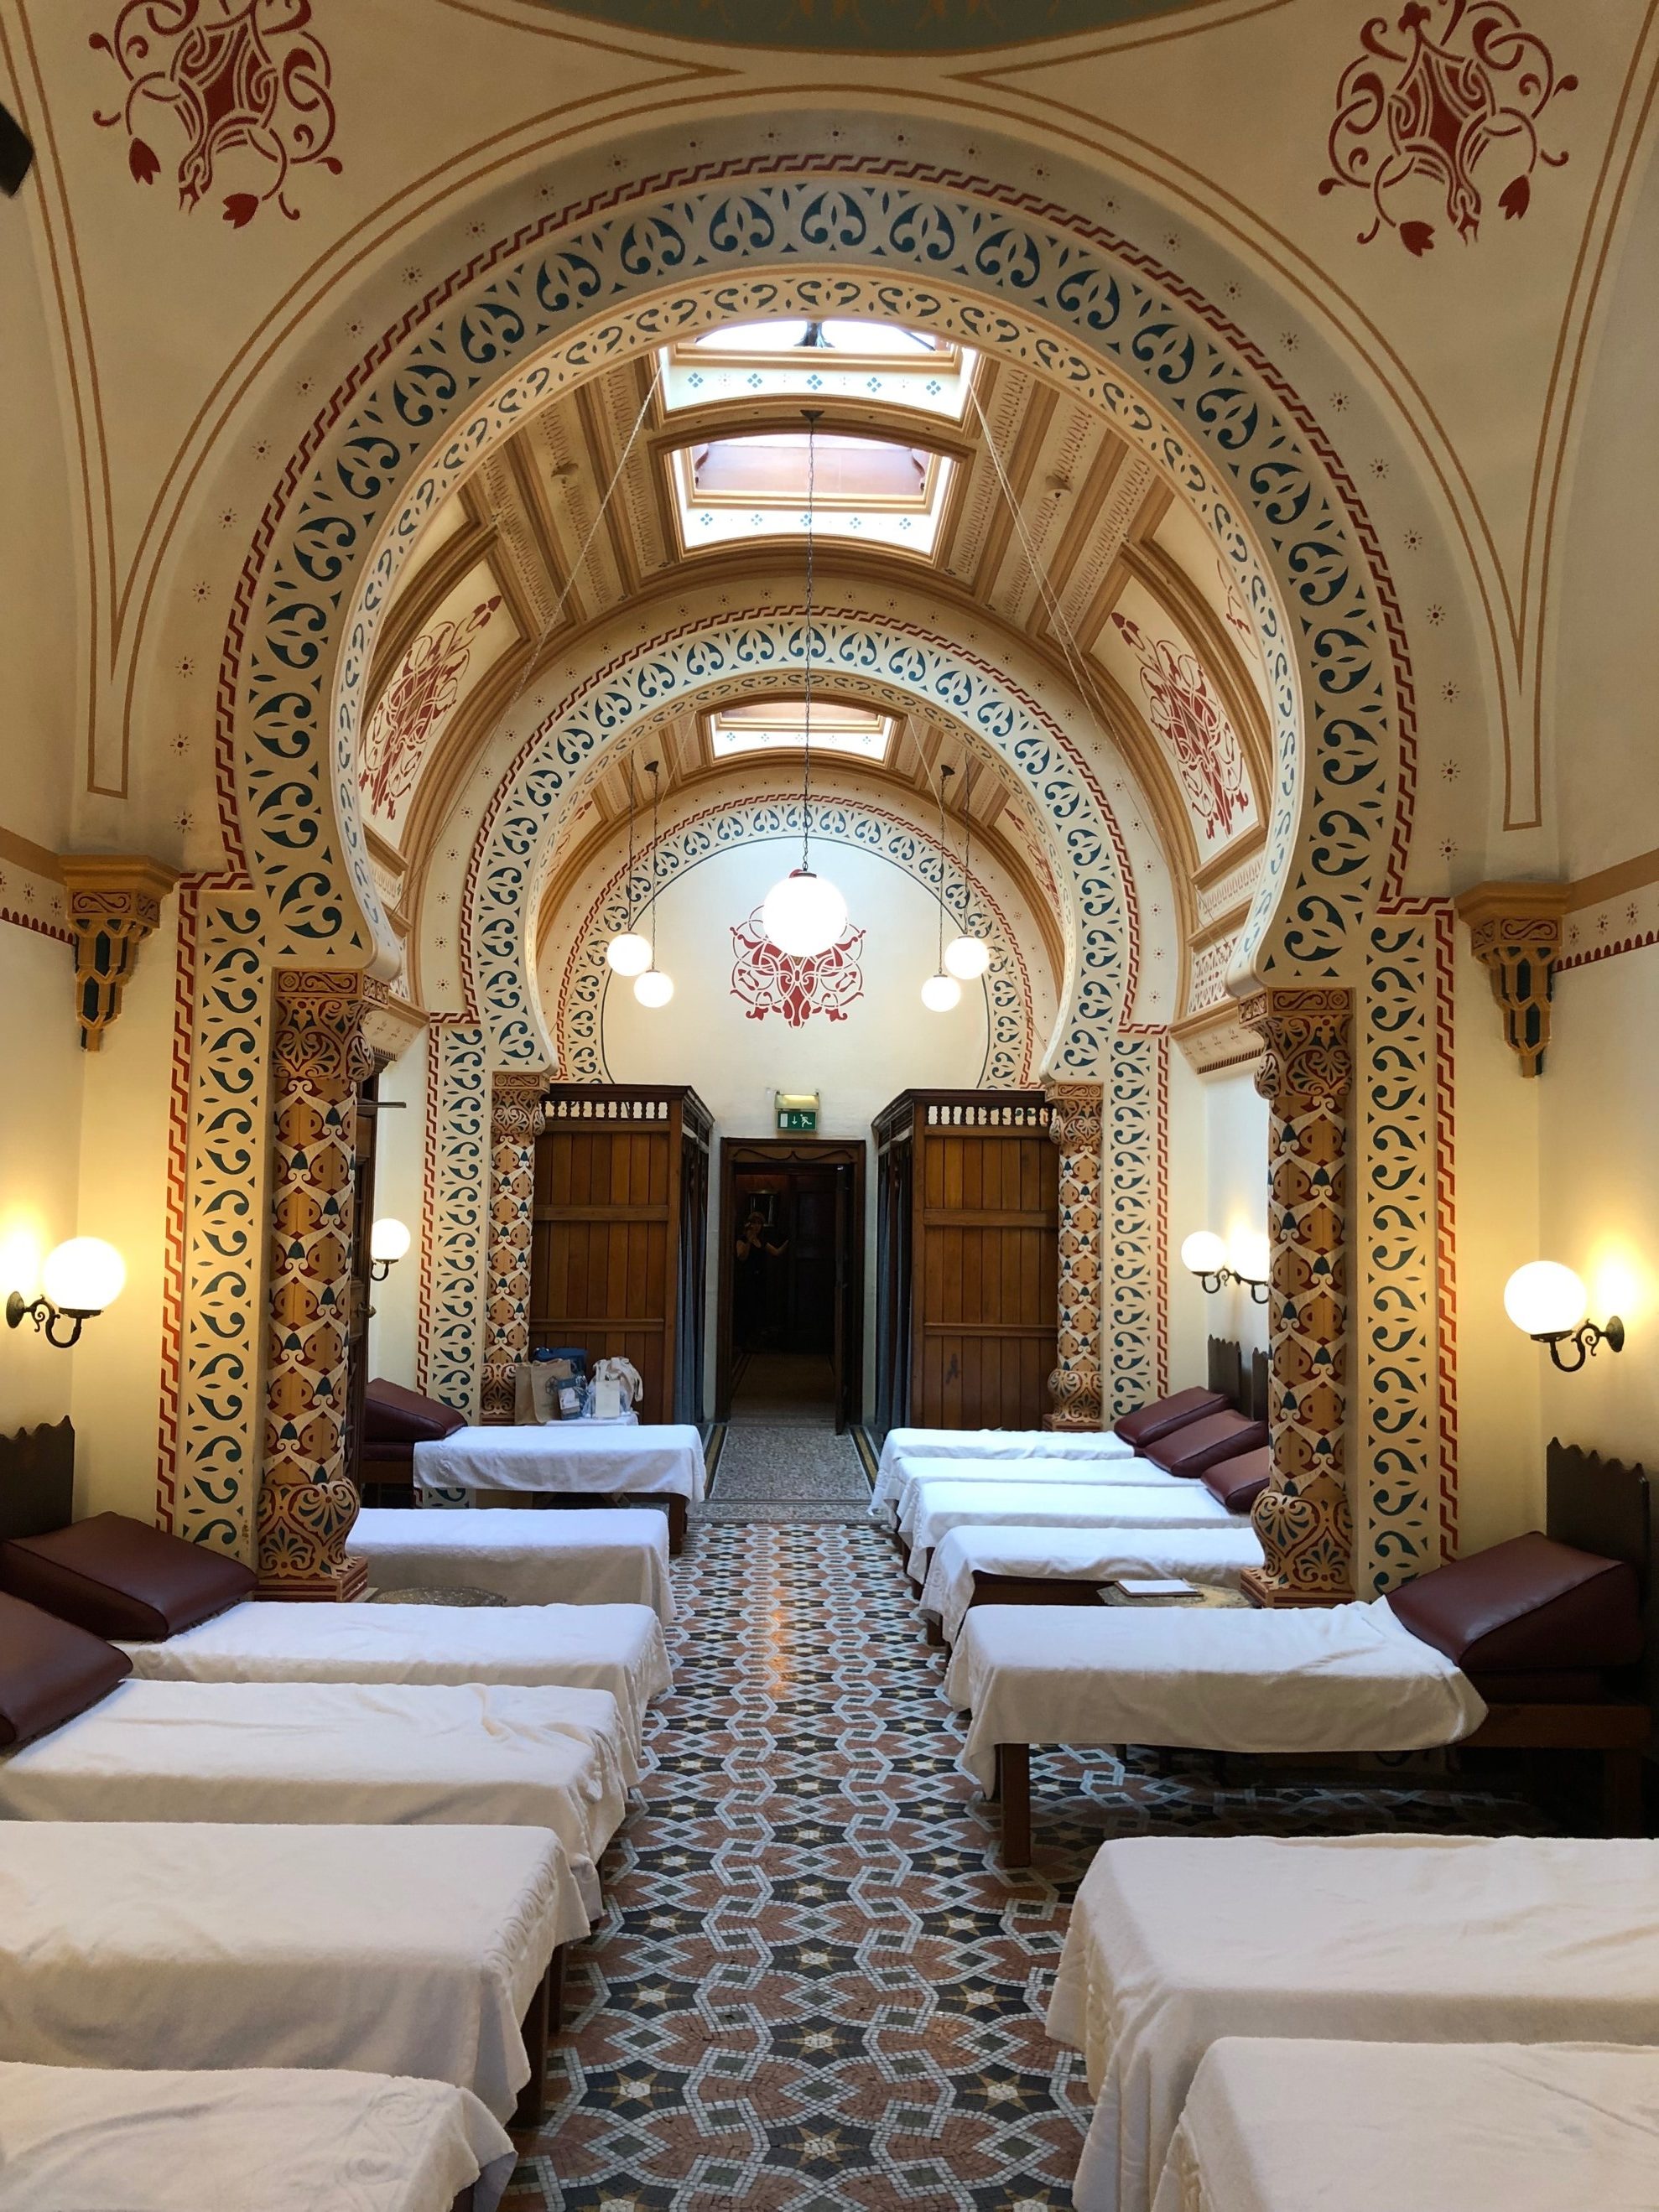 A Turkish Bath in North Yorkshire - Yorkshire's Best Guides